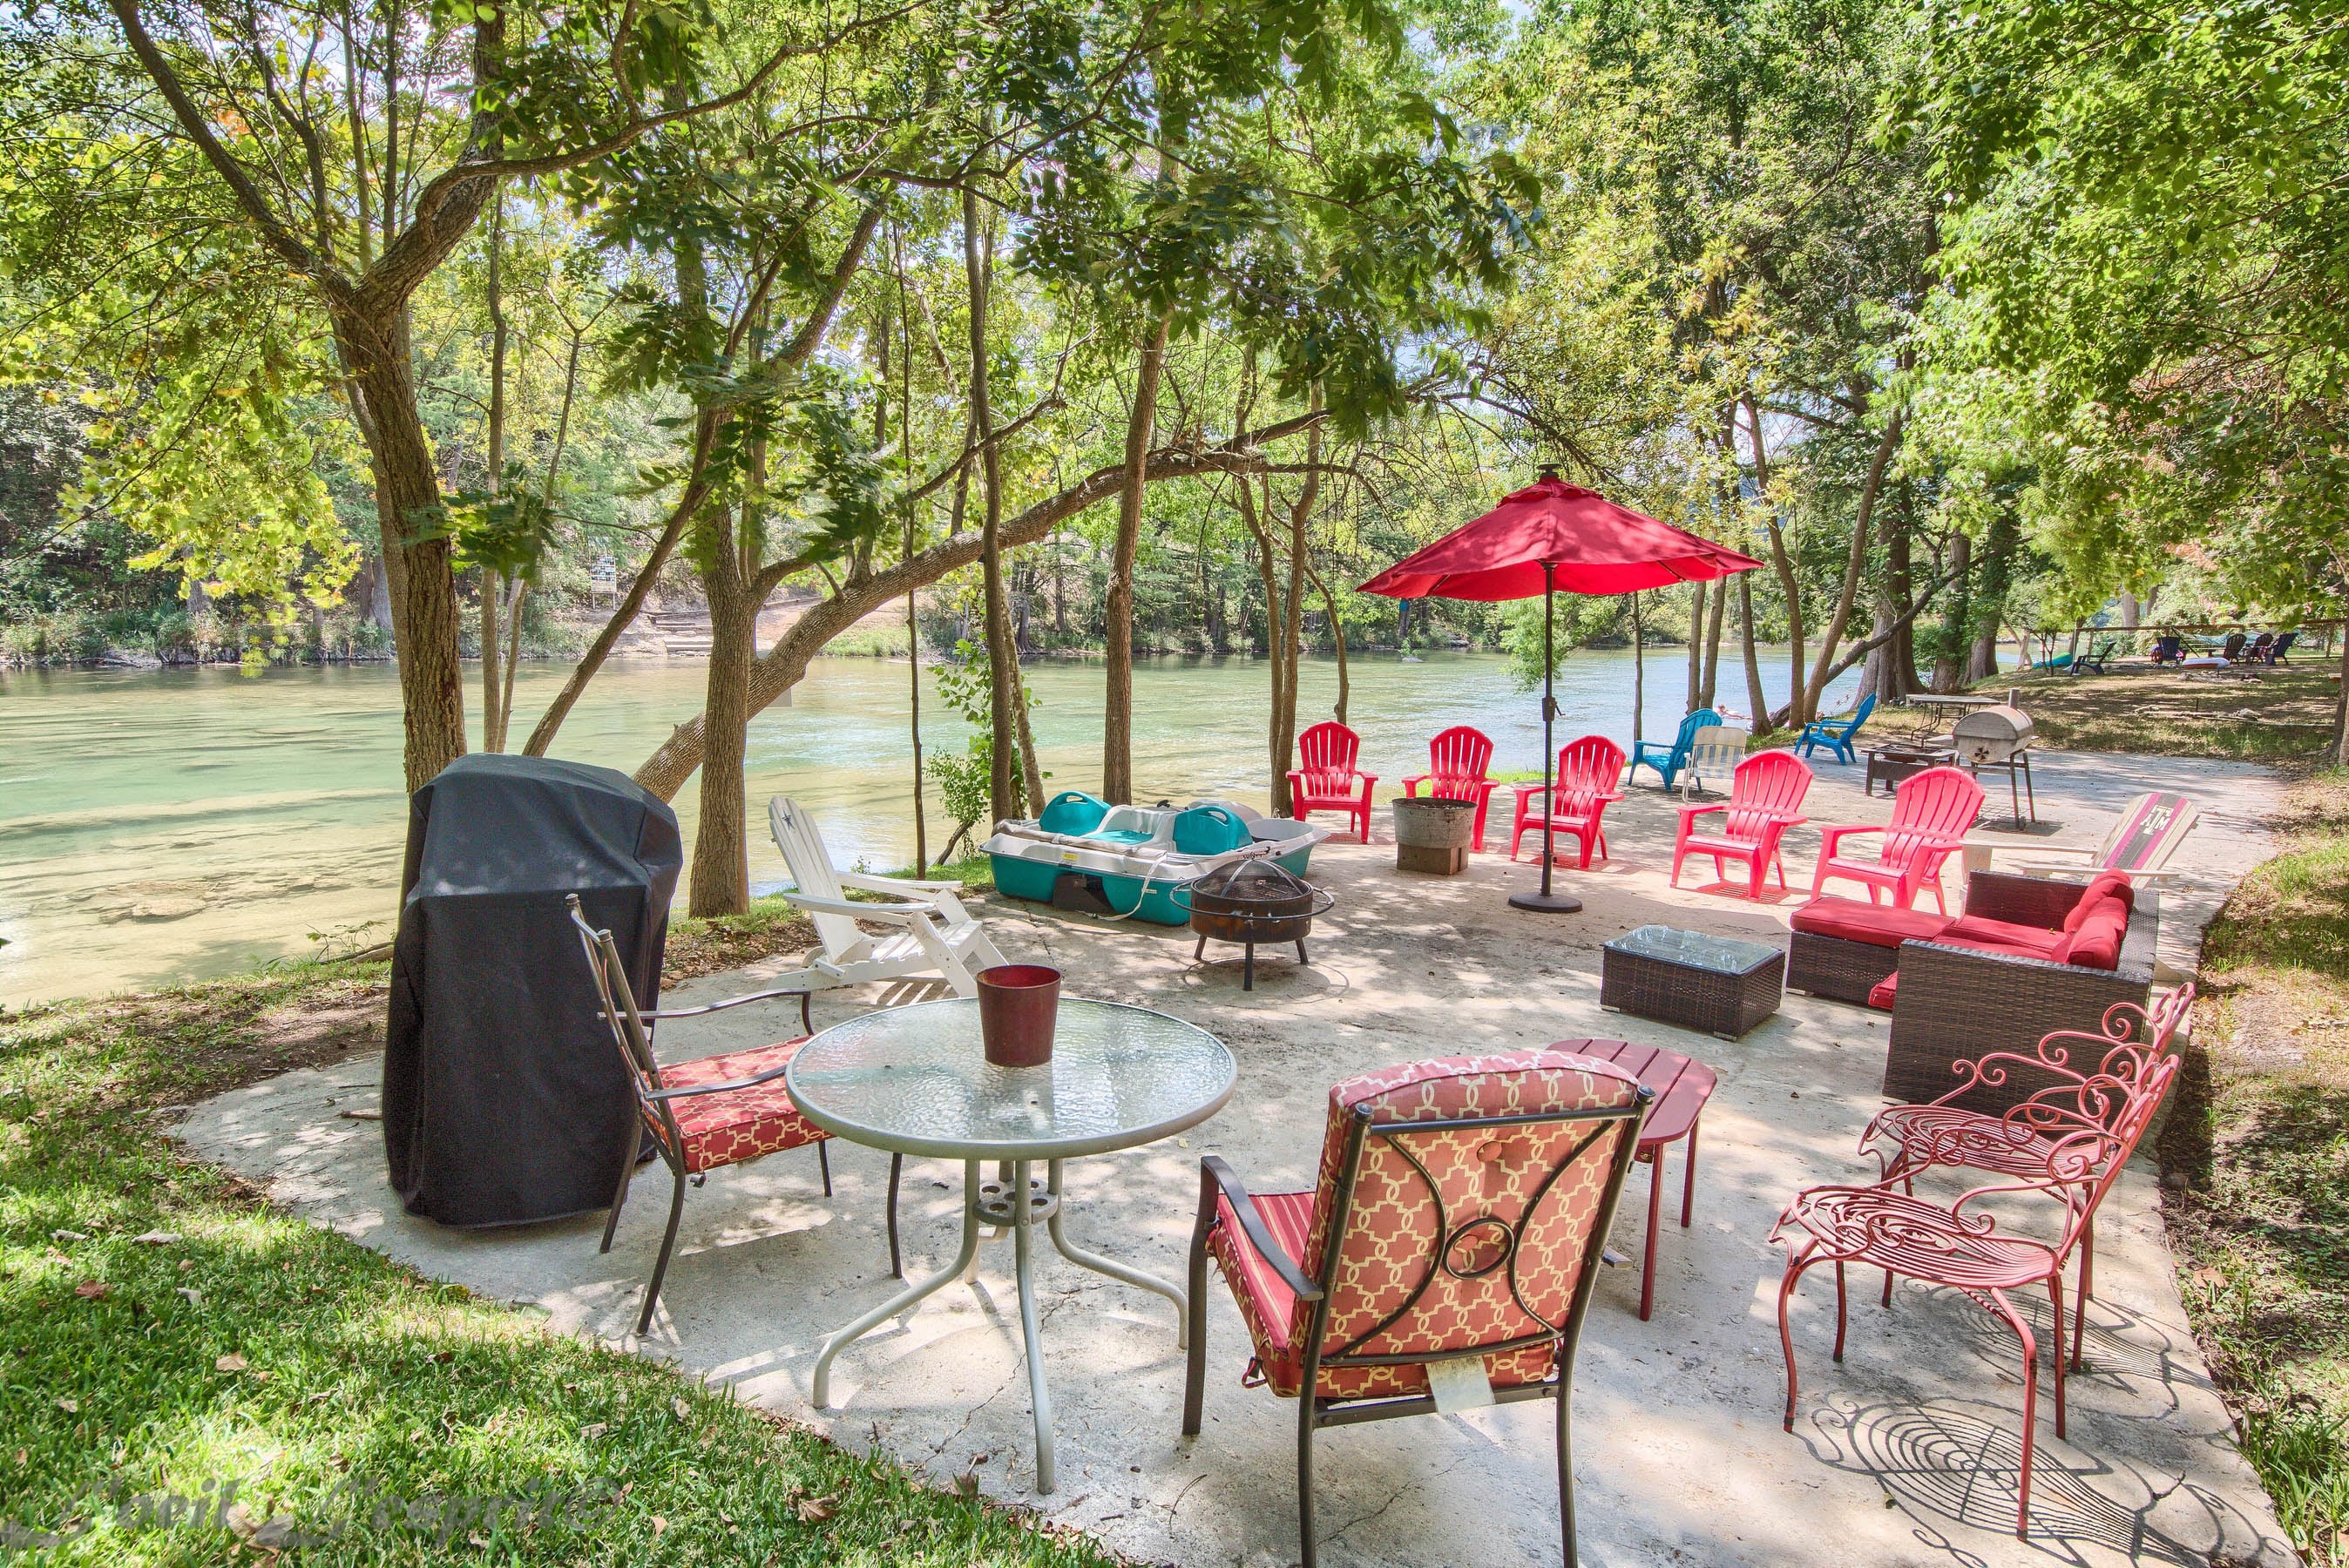  Concrete pad at the waters edge with ample seating, propane grill, and direct river access.
Paddle Boat was swept away in flood, no longer available. 